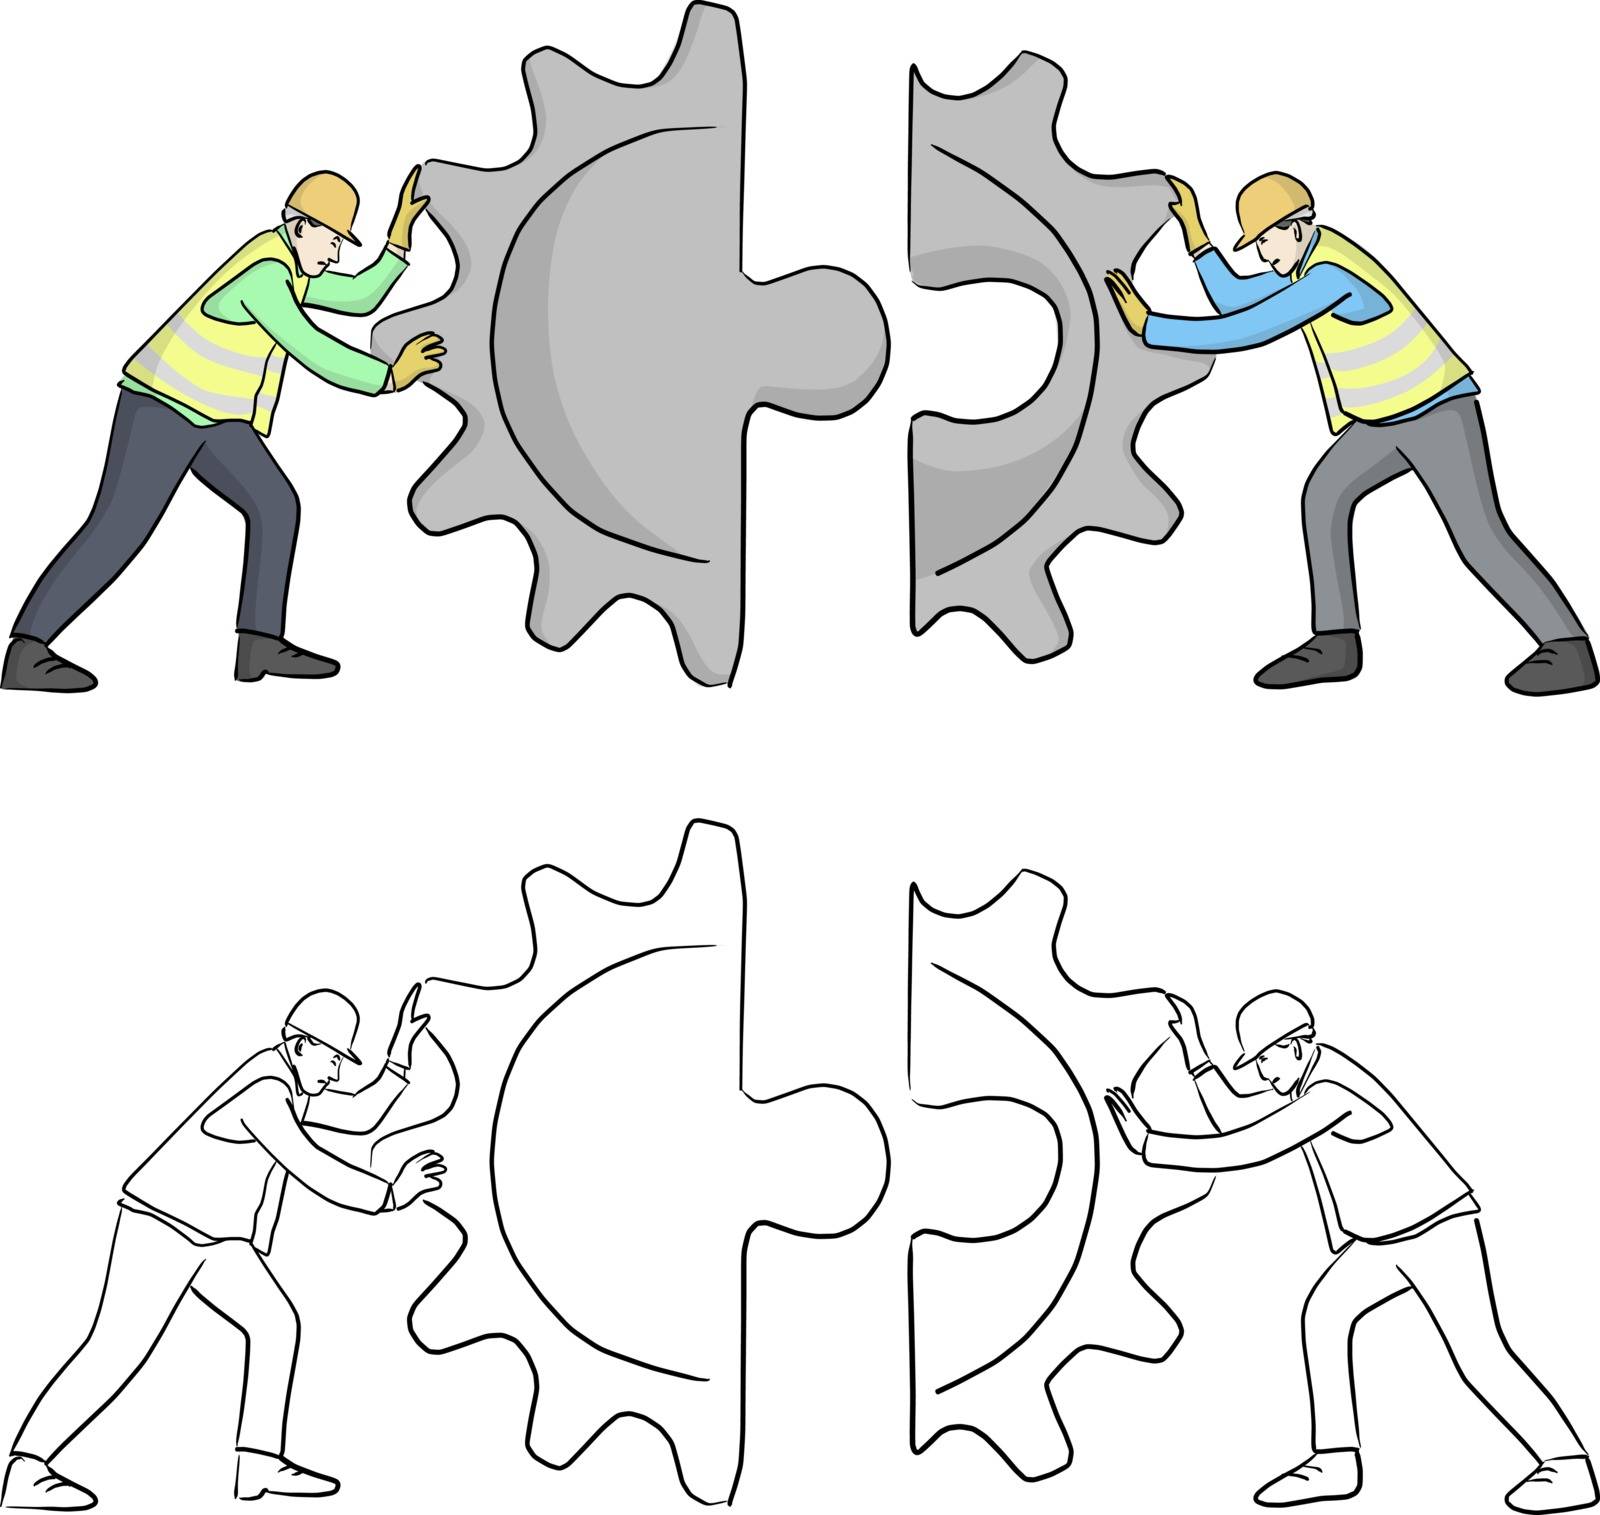 engineer put the geer jigsaw puzzle together vector illustration sketch doodle hand drawn with black lines isolated on white background. Teamwork concept.